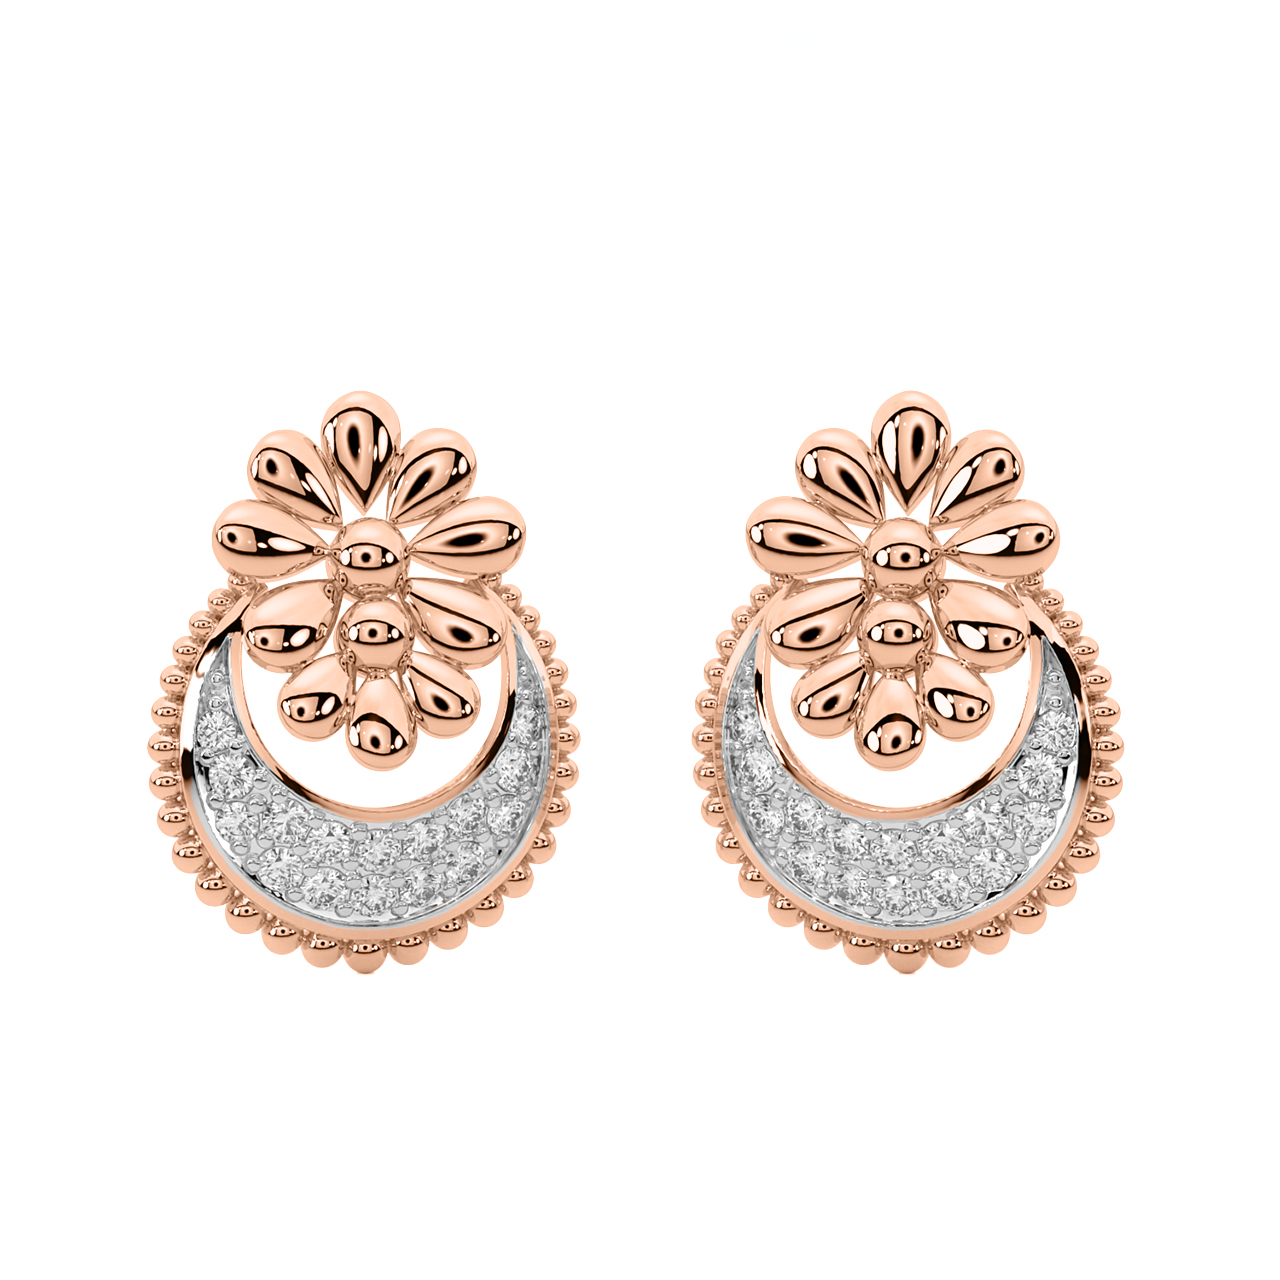 Nocturnal Shades Diamond Earrings